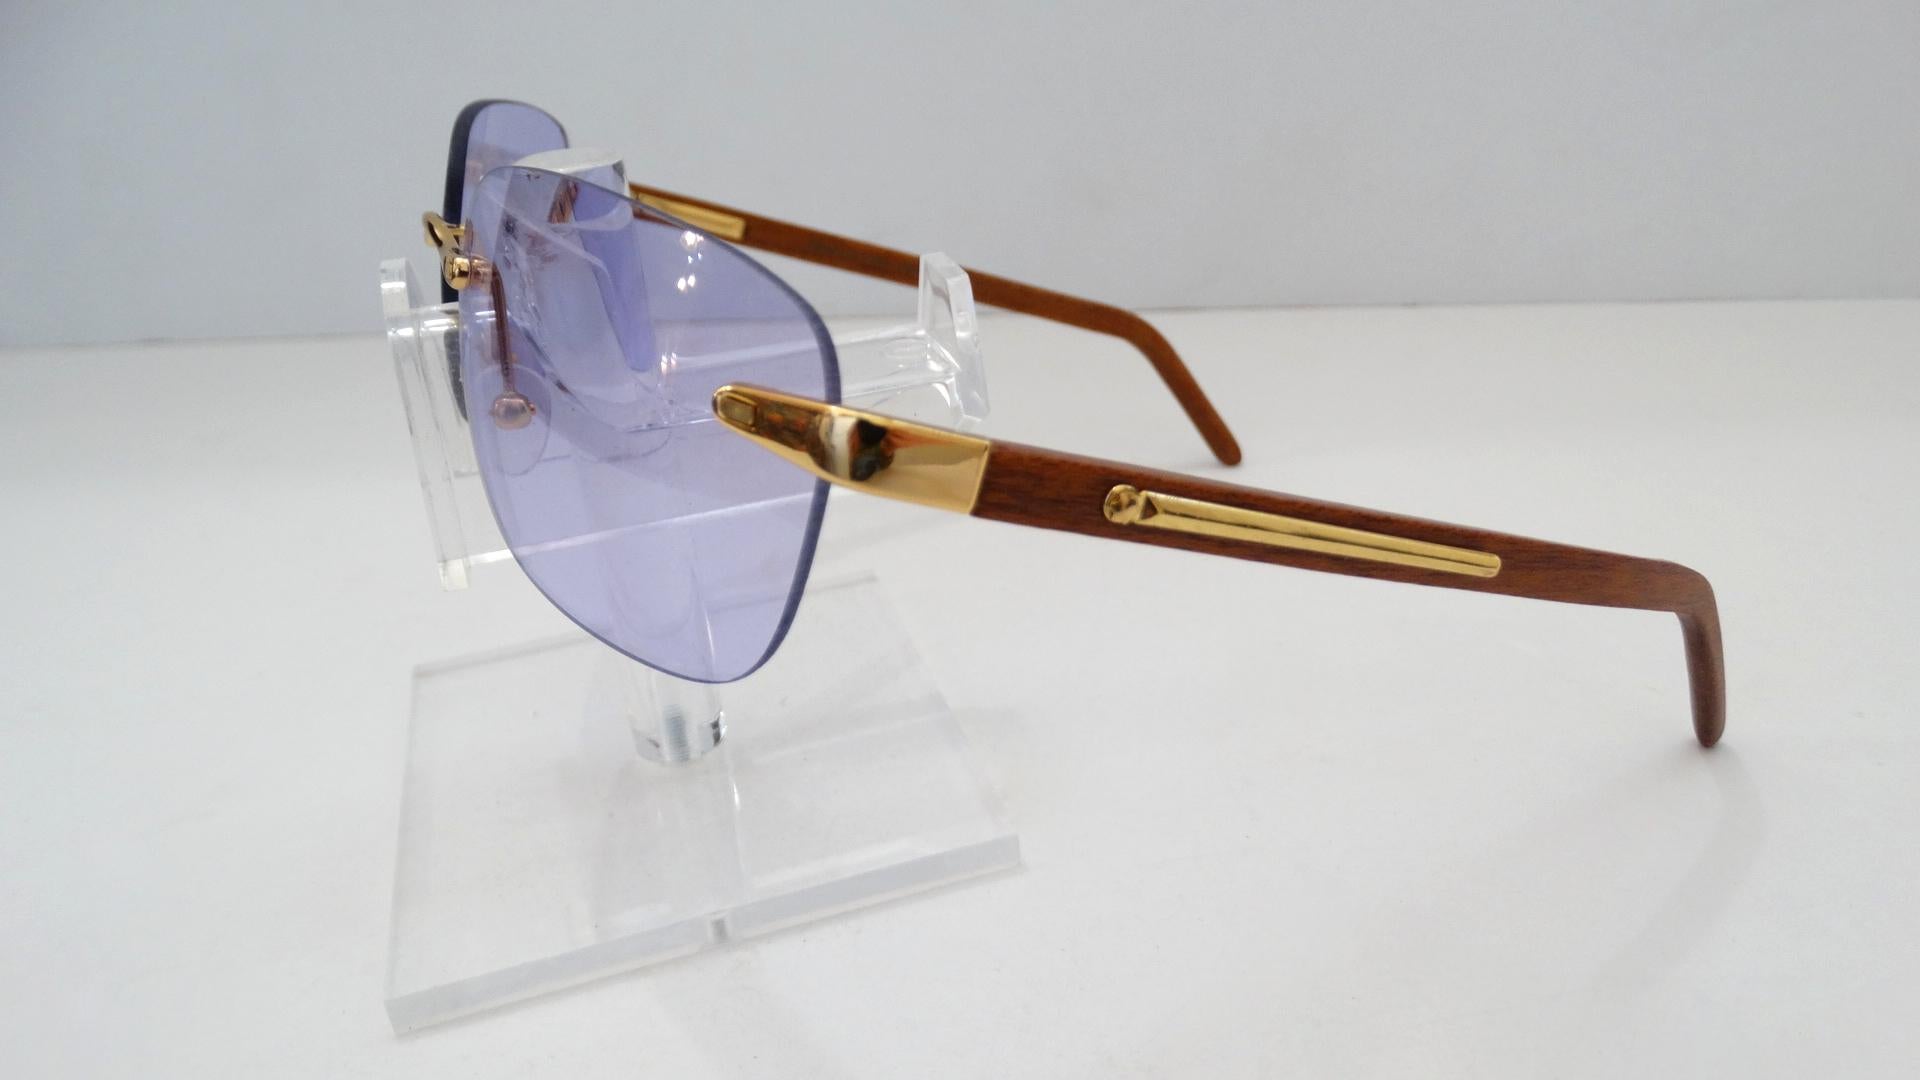 The Perfect Shade of Purple featured on these sunglasses. Circa 1990s, these dead stock Porta Romana rectangular sunglasses feature clear purple lens and gold hardware. The gold hardware sits on the lens and the light brown wood stain arms, features